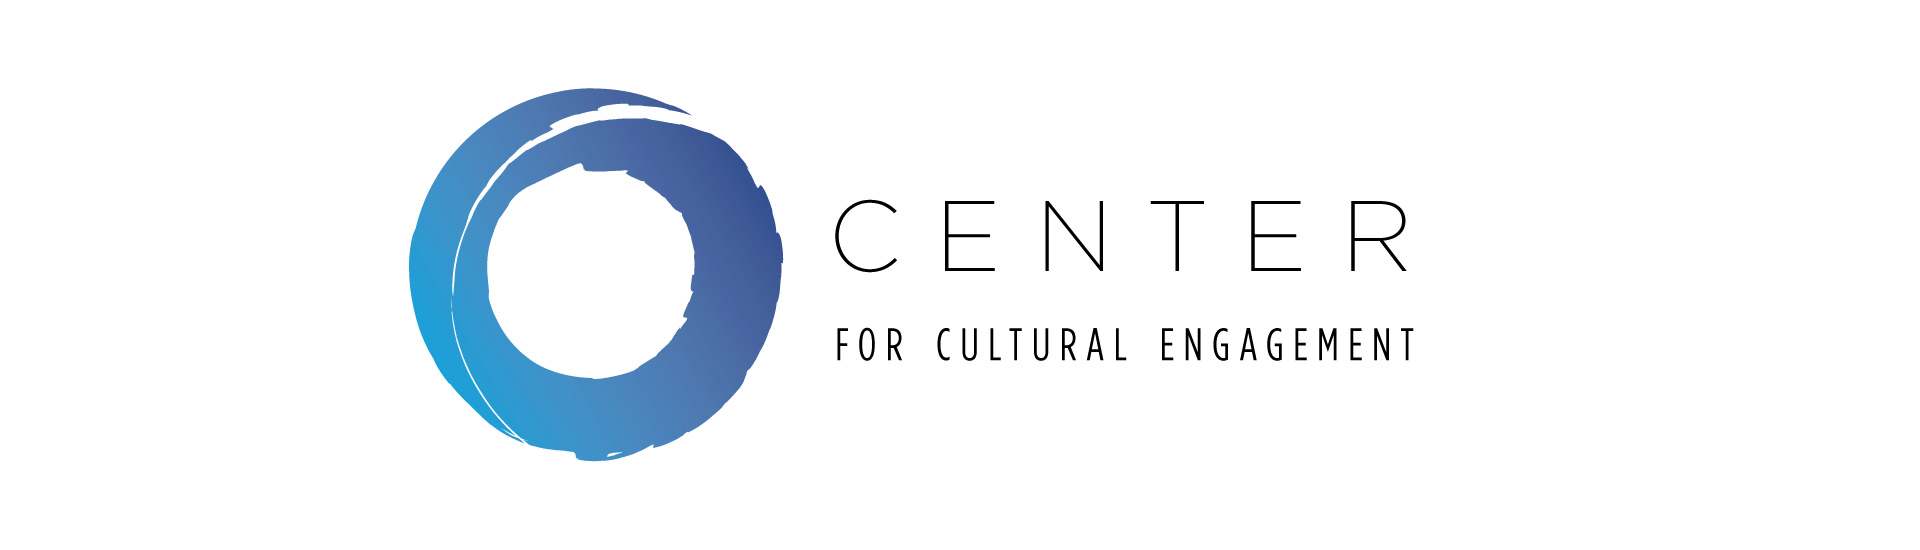 The Center for cultural engagement